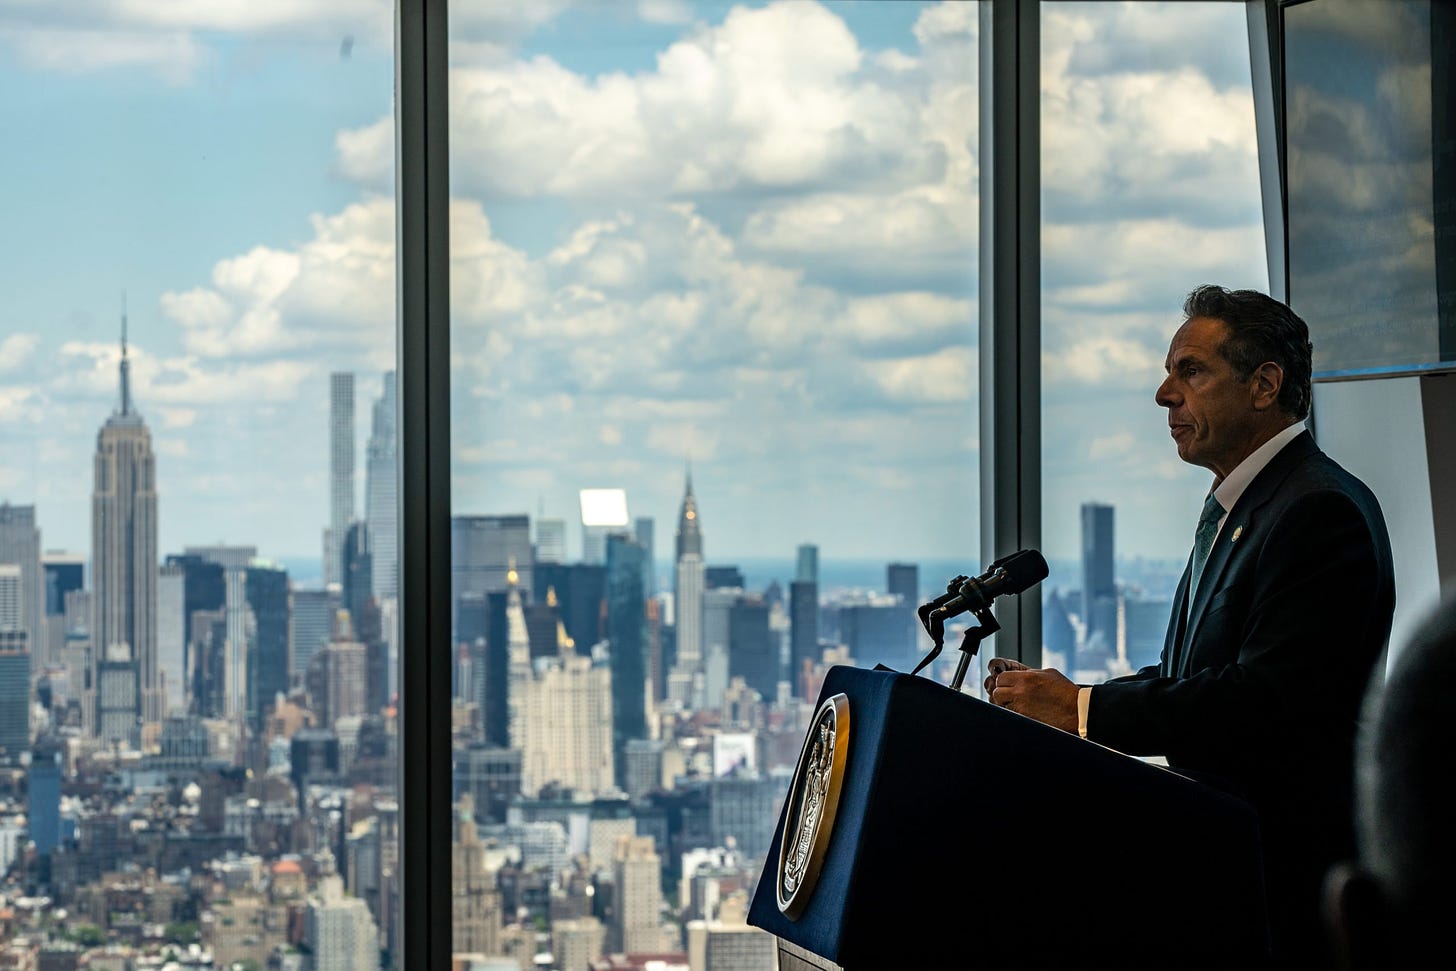 New York Gov. Andrew Cuomo speaks during a press conference at One World Trade Center on June 15, 2021 in New York City. (Photo by David Dee Delgado/Getty Images)